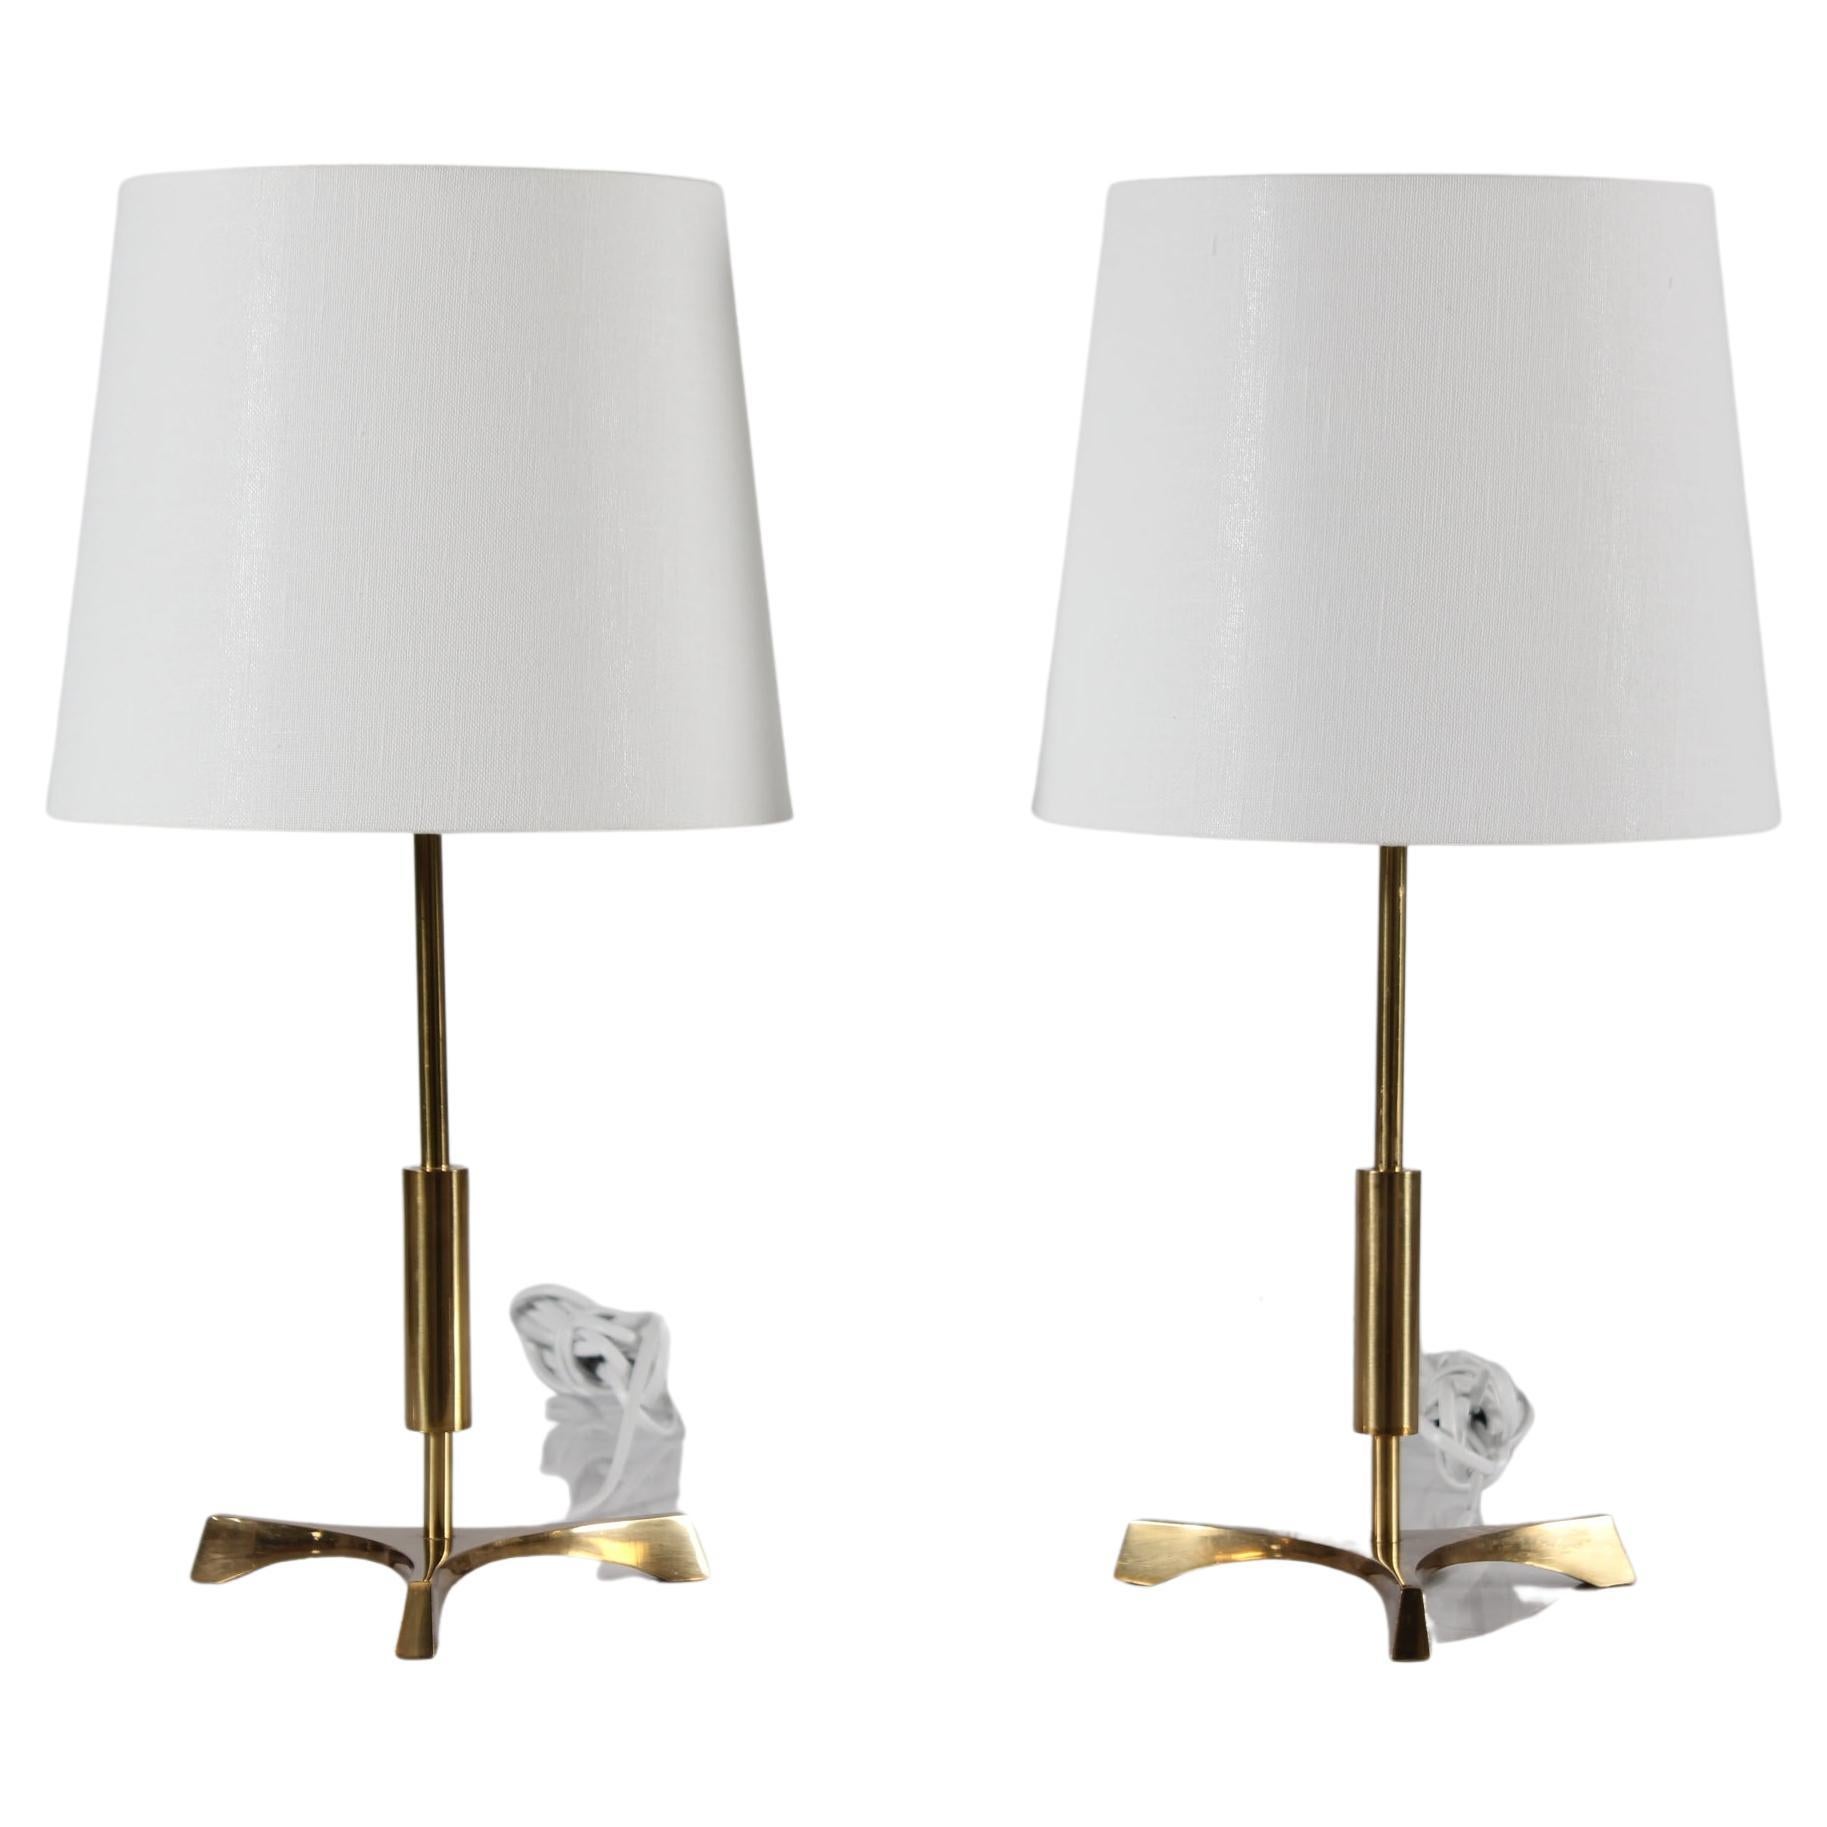 Pair of mid-century Danish tripod table lamps in Jo Hammerborg style.
The lamps are made of brass in the 1960s

Included is a pair of new lampshades designed in Denmark.
The shade is made of woven fabric with some texture and the color is